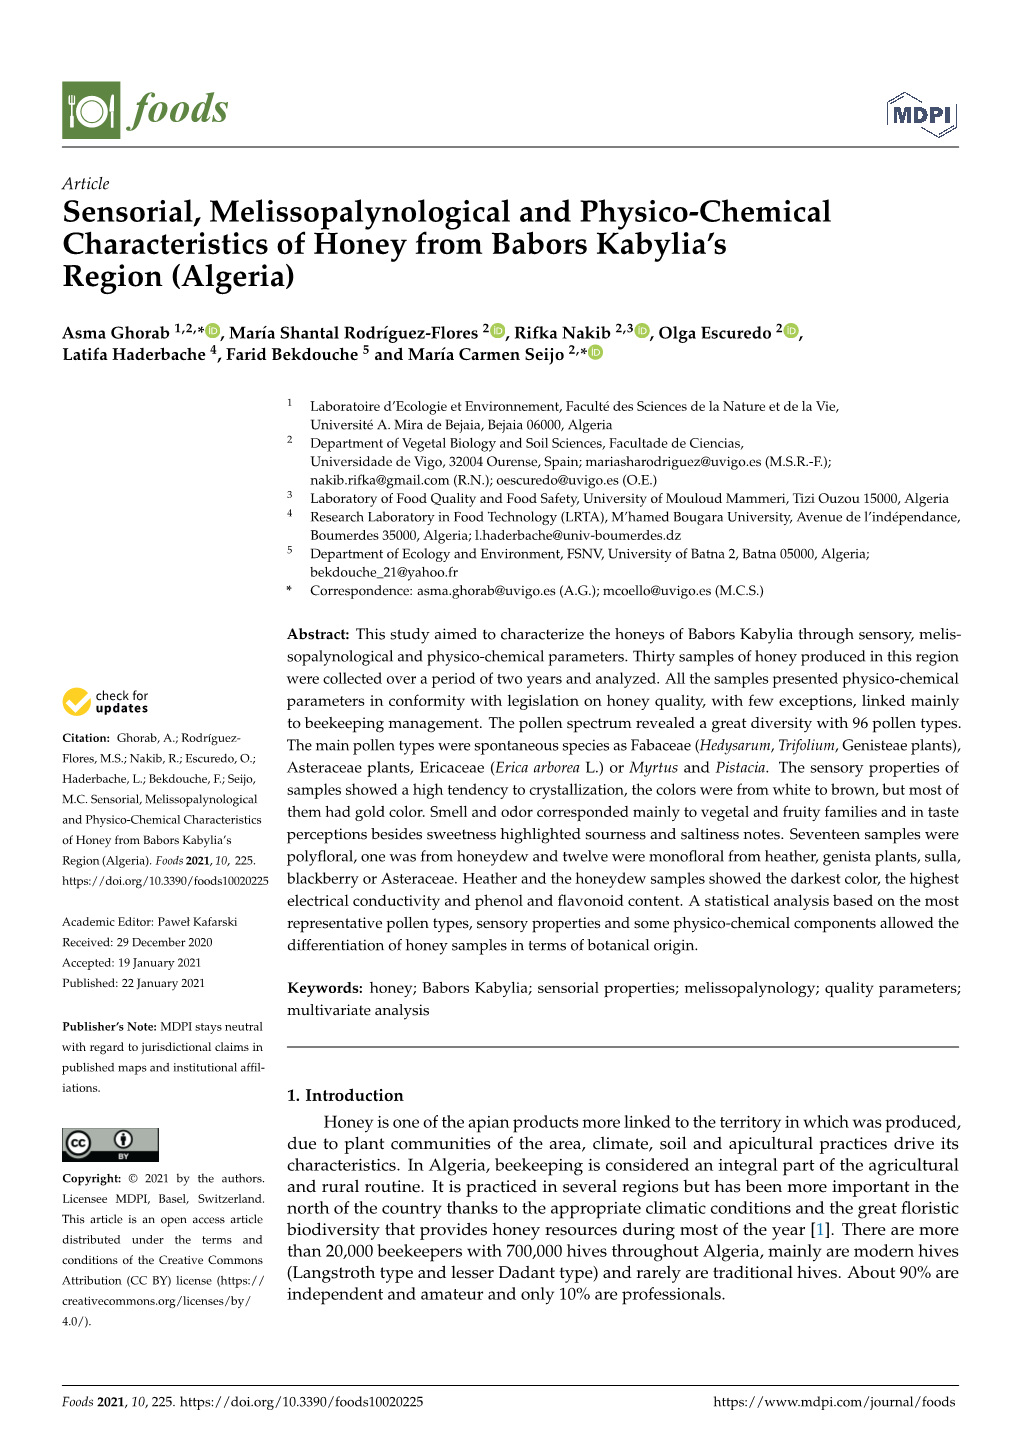 Sensorial, Melissopalynological and Physico-Chemical Characteristics of Honey from Babors Kabylia's Region